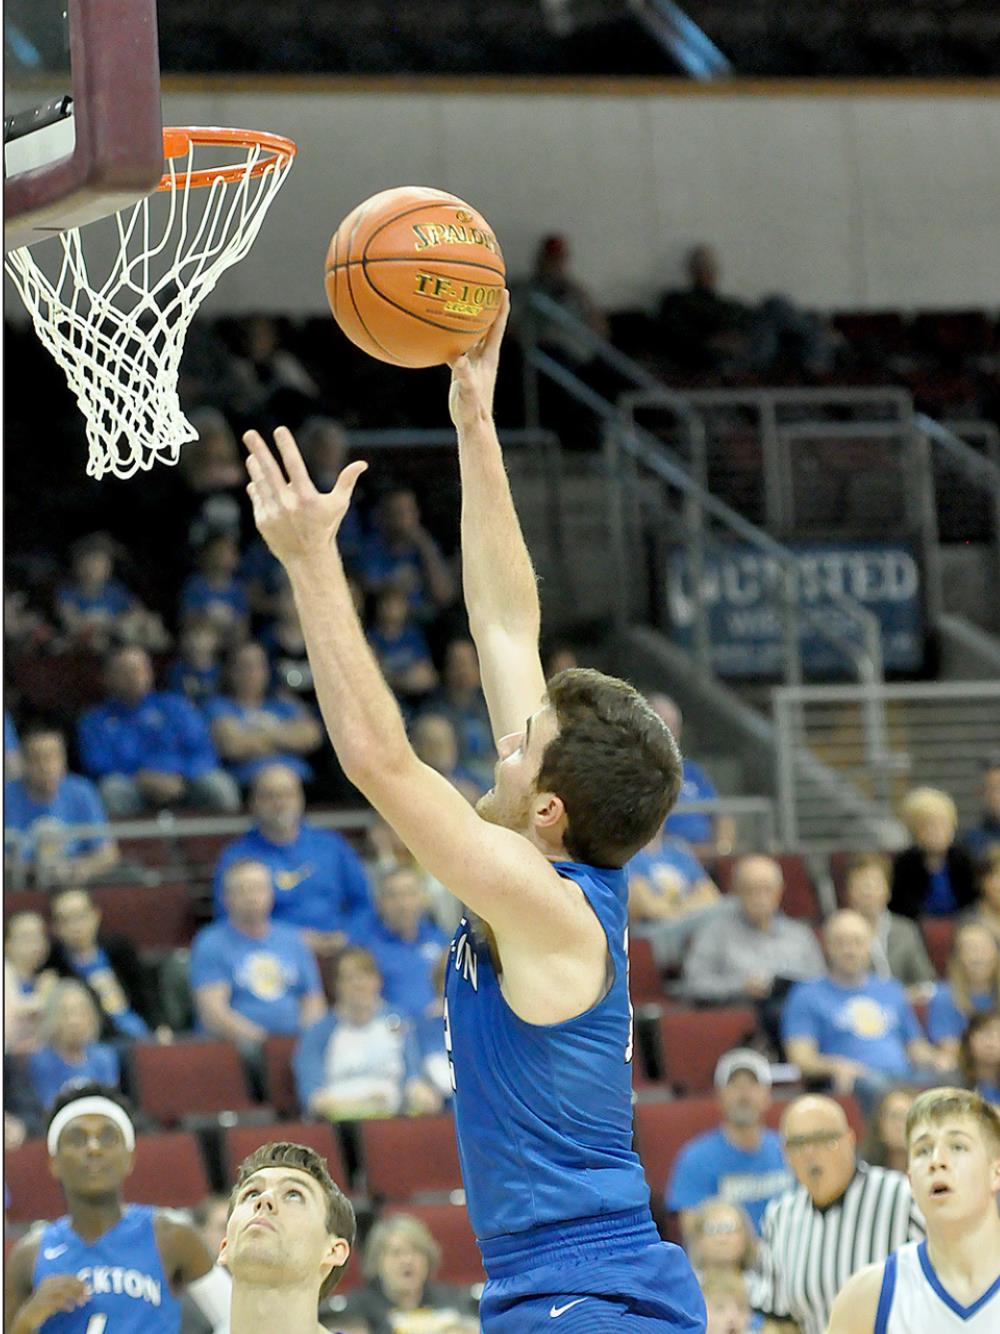 GAGE CONYAC, a senior for the Tigers, goes up for a shot during quarterfinal action of the KSHSAA Class 1A State Basketball Tournament held in Dodge City.